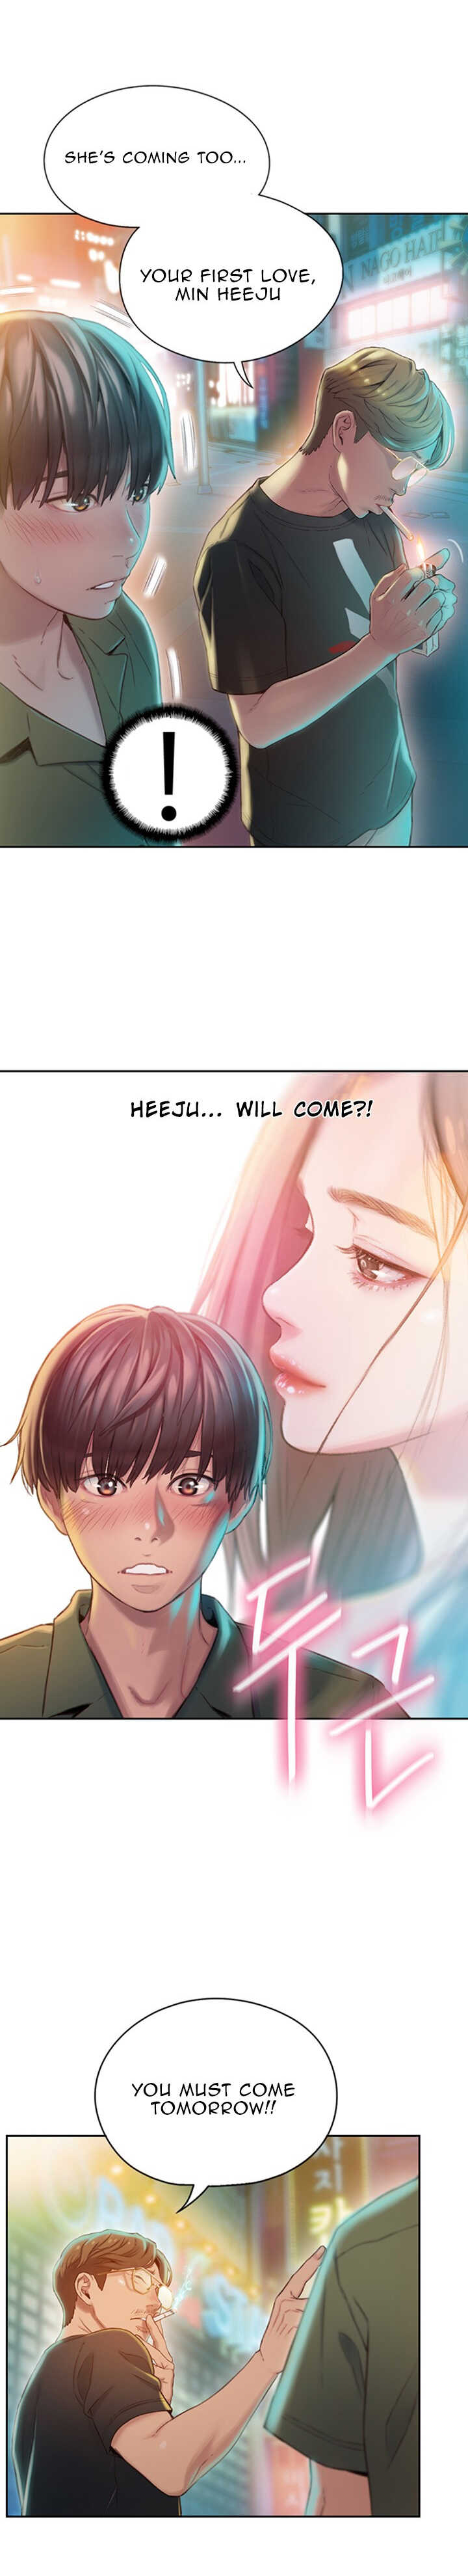 [Park Hyeongjun] Love Limit Exceeded (01-22) Ongoing - Page 29